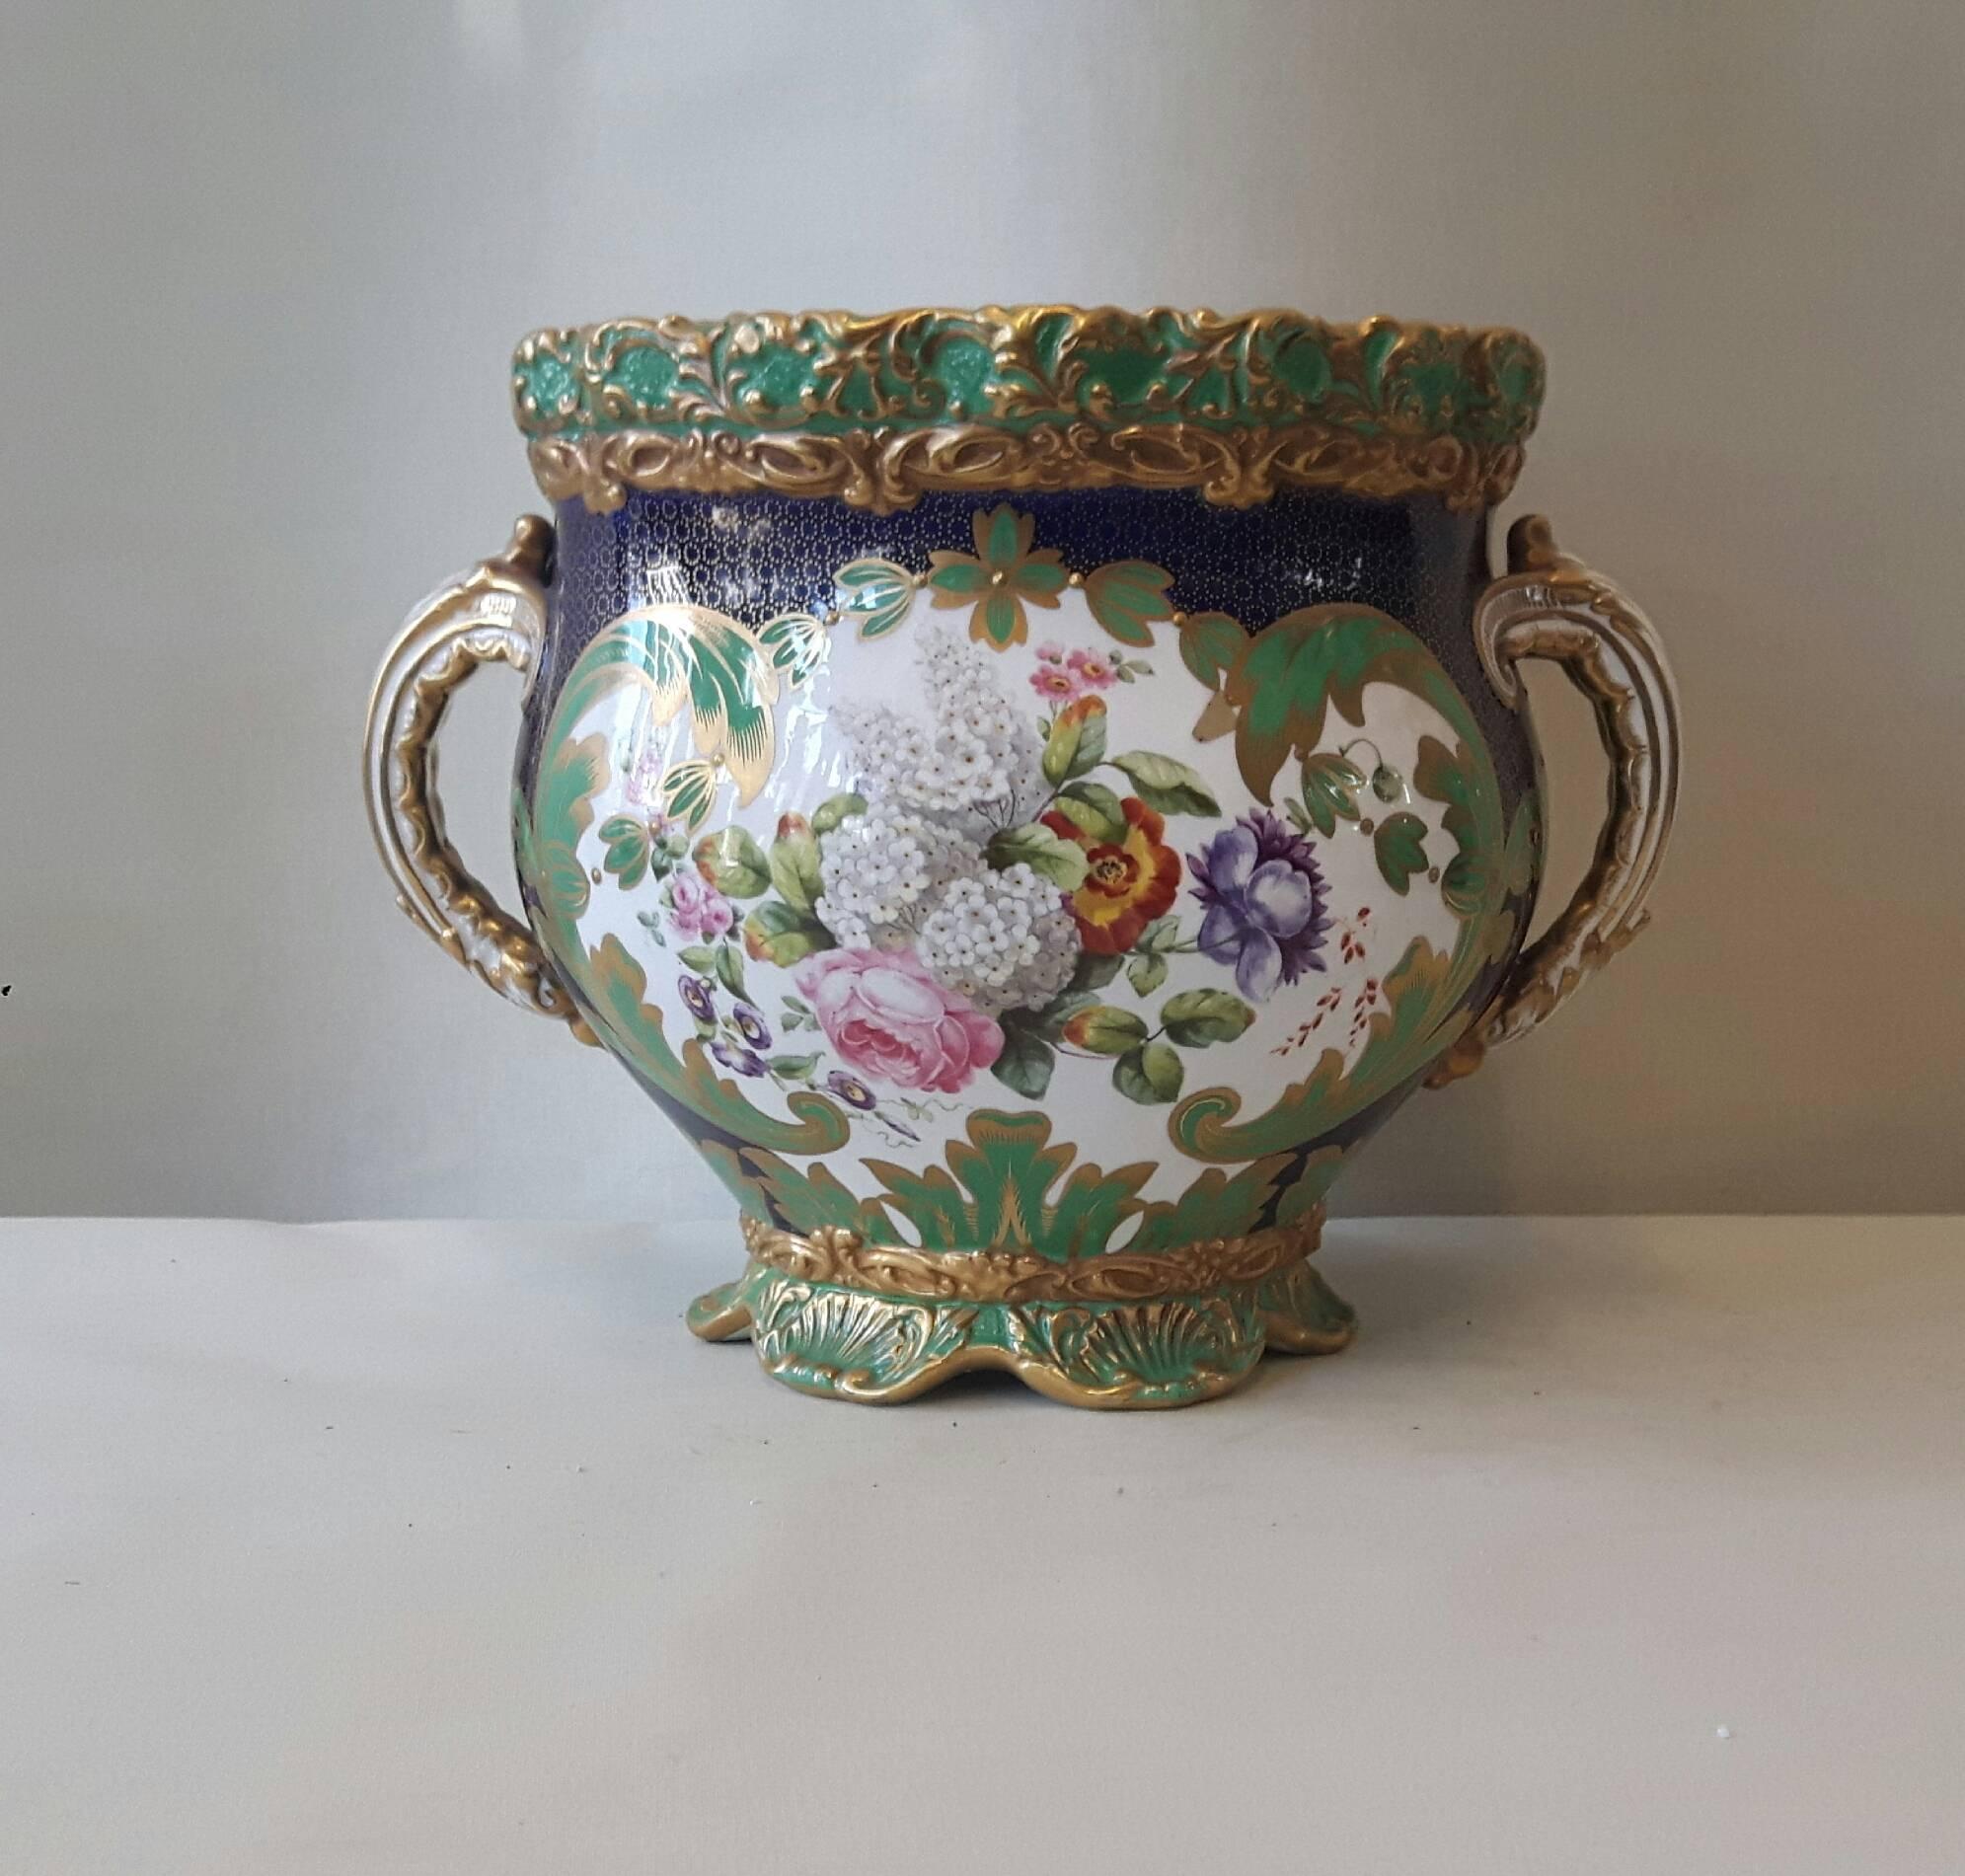 A lovely Copeland cachepot, hand-painted with cartouches of fruit and flowers in the 18th century manner, surrounded by garlands of foliage and gilding. The rounded body sits on a rim of rococo

The rounded body sits on a rim of rococo